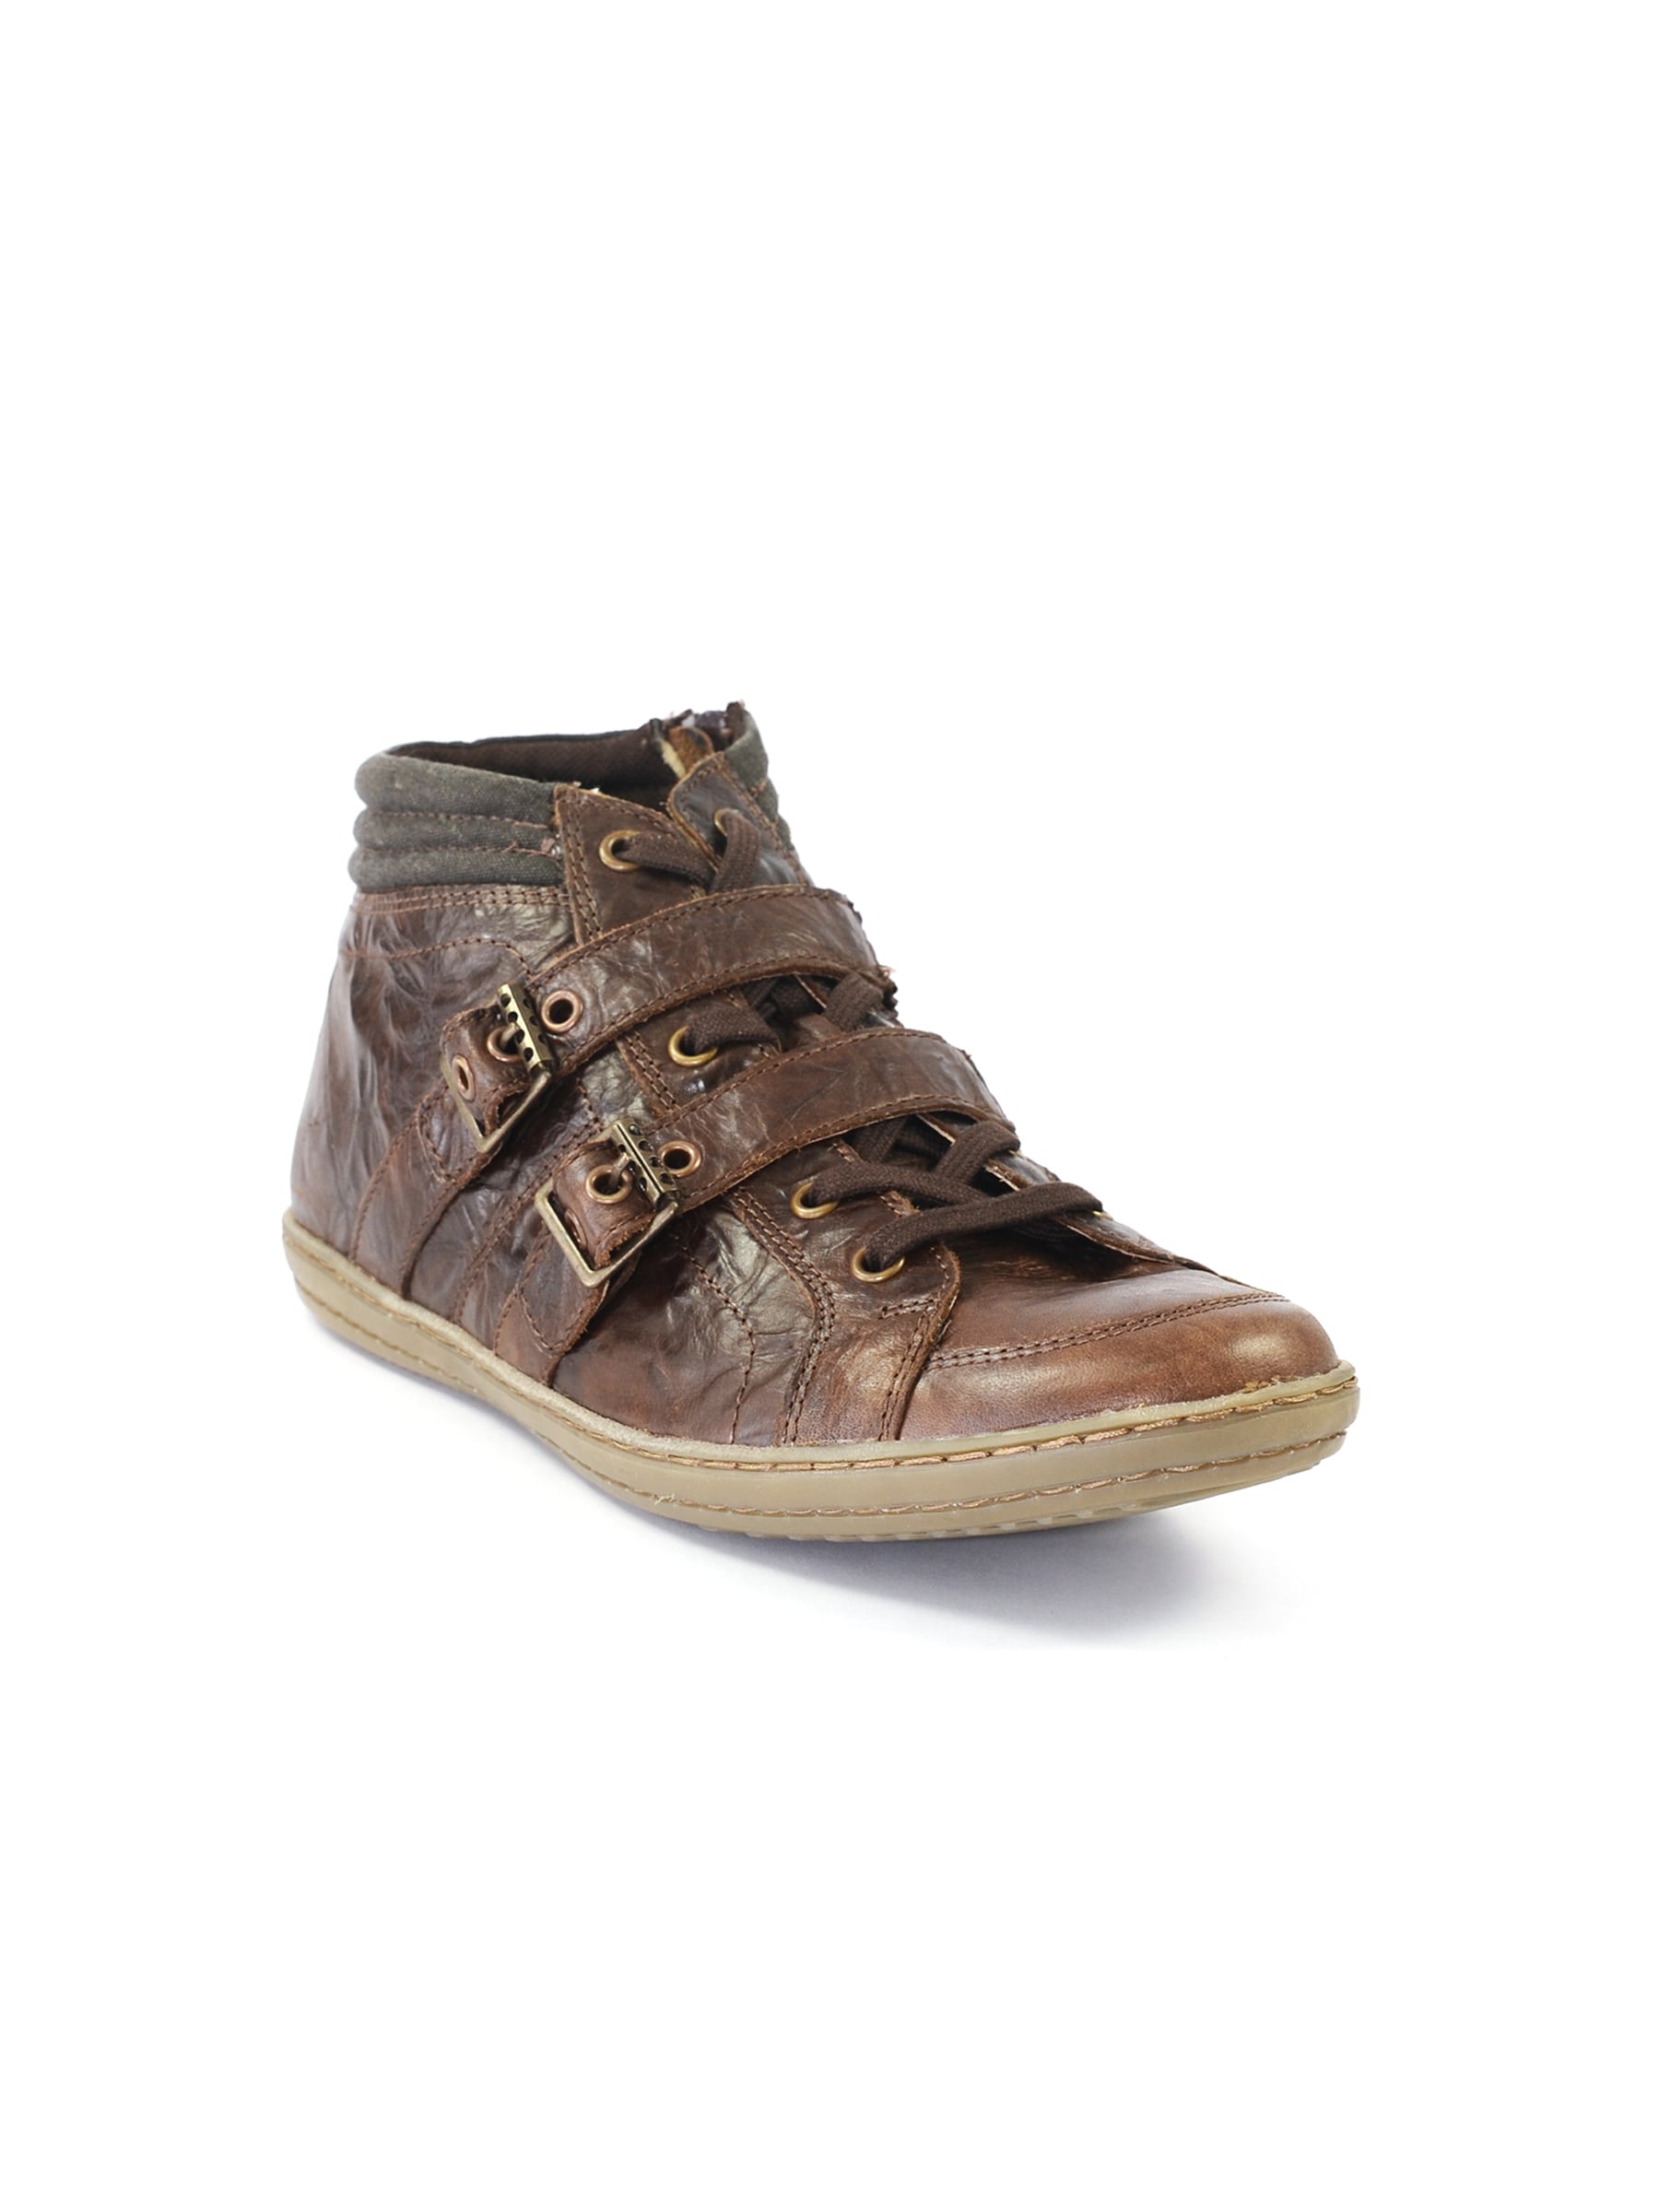 Red Tape Men's Casual Brown Shoe